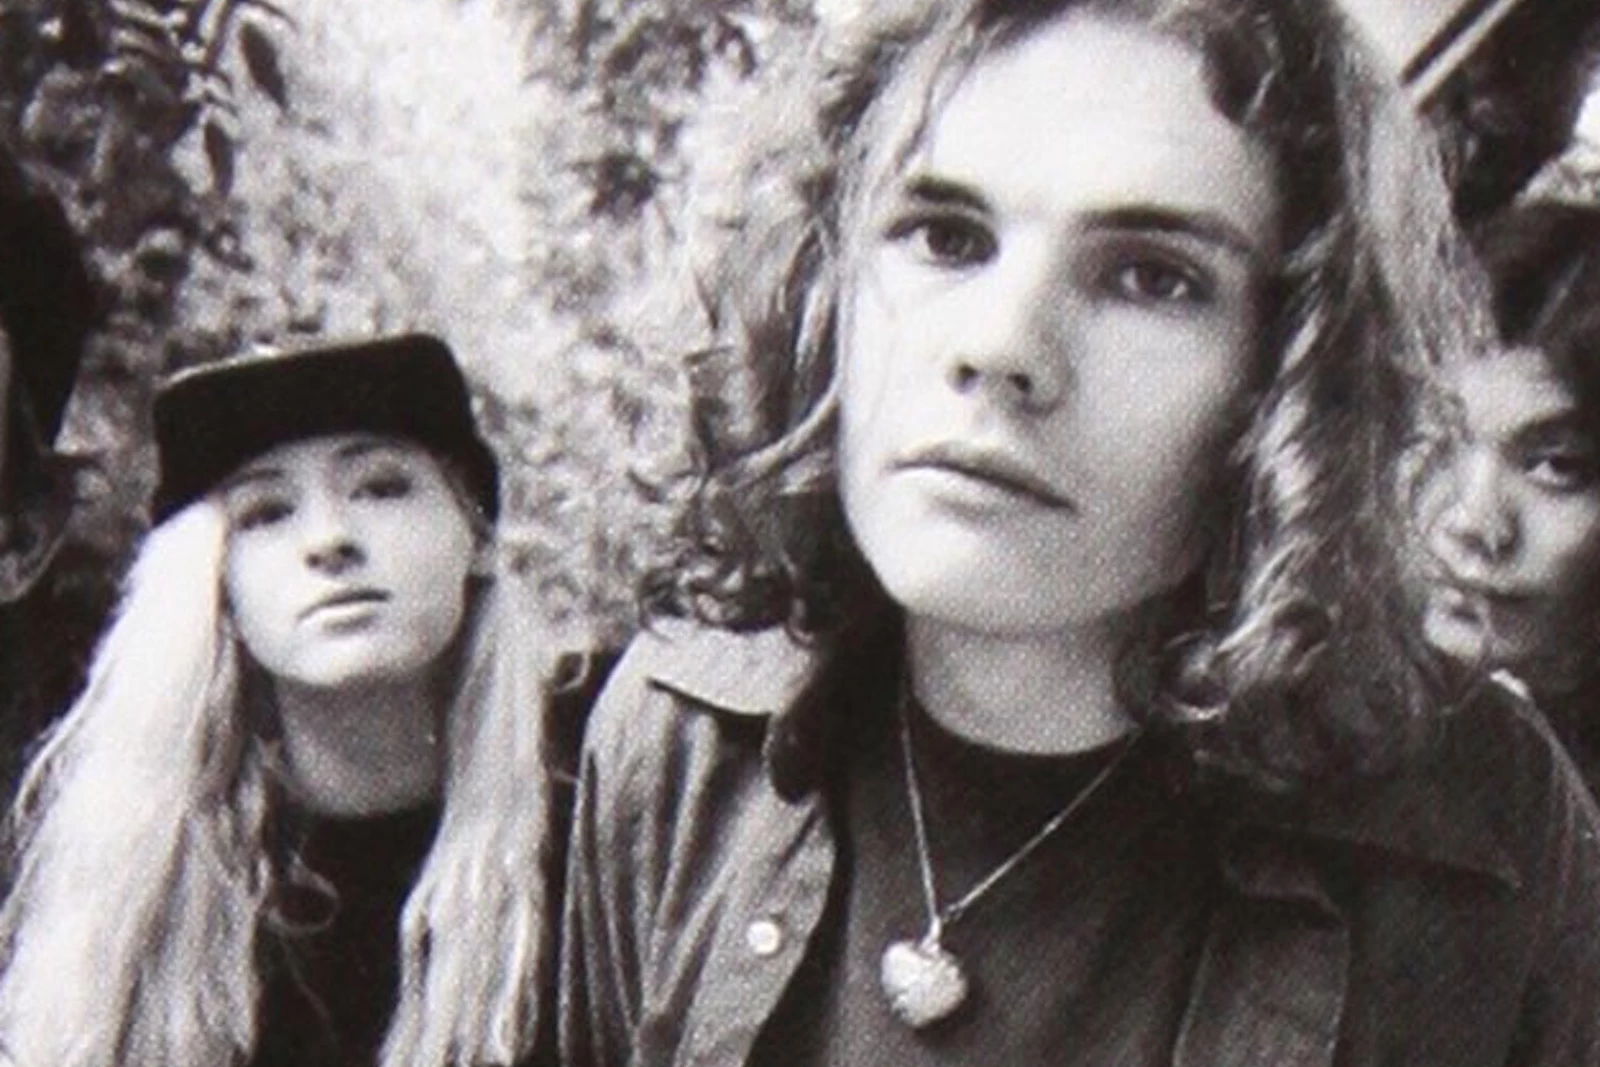 Billy Corgan on whether D'arcy Wretzky will ever rejoin Smashing Pumpkins:  That's a dead end